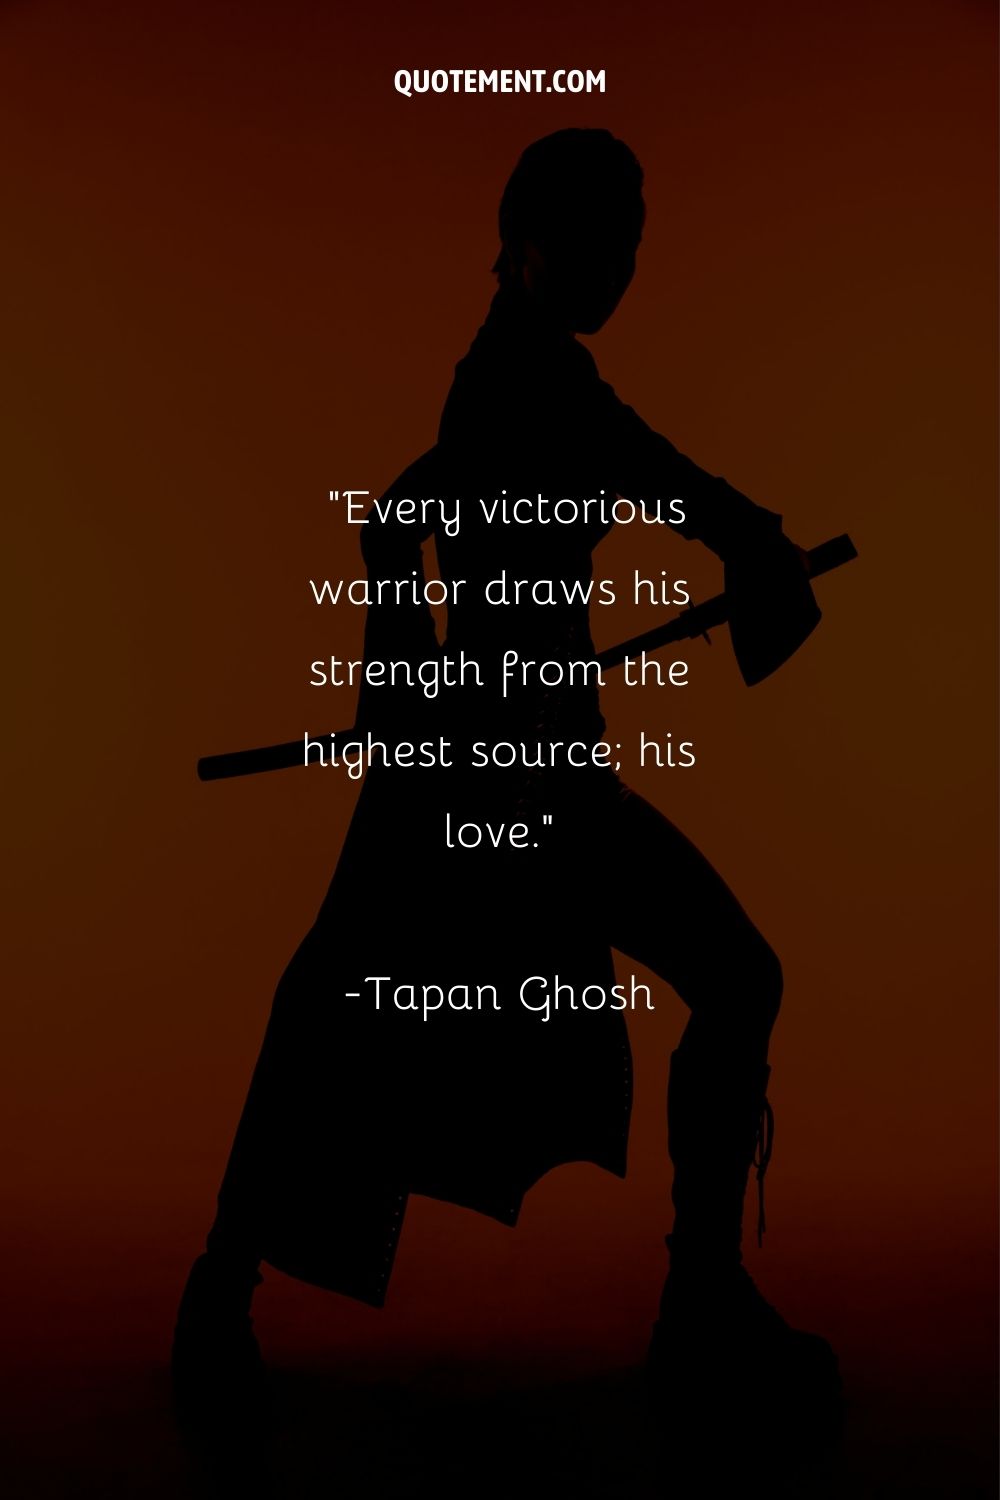 A warrior in shadow representing an inspiring warrior quote